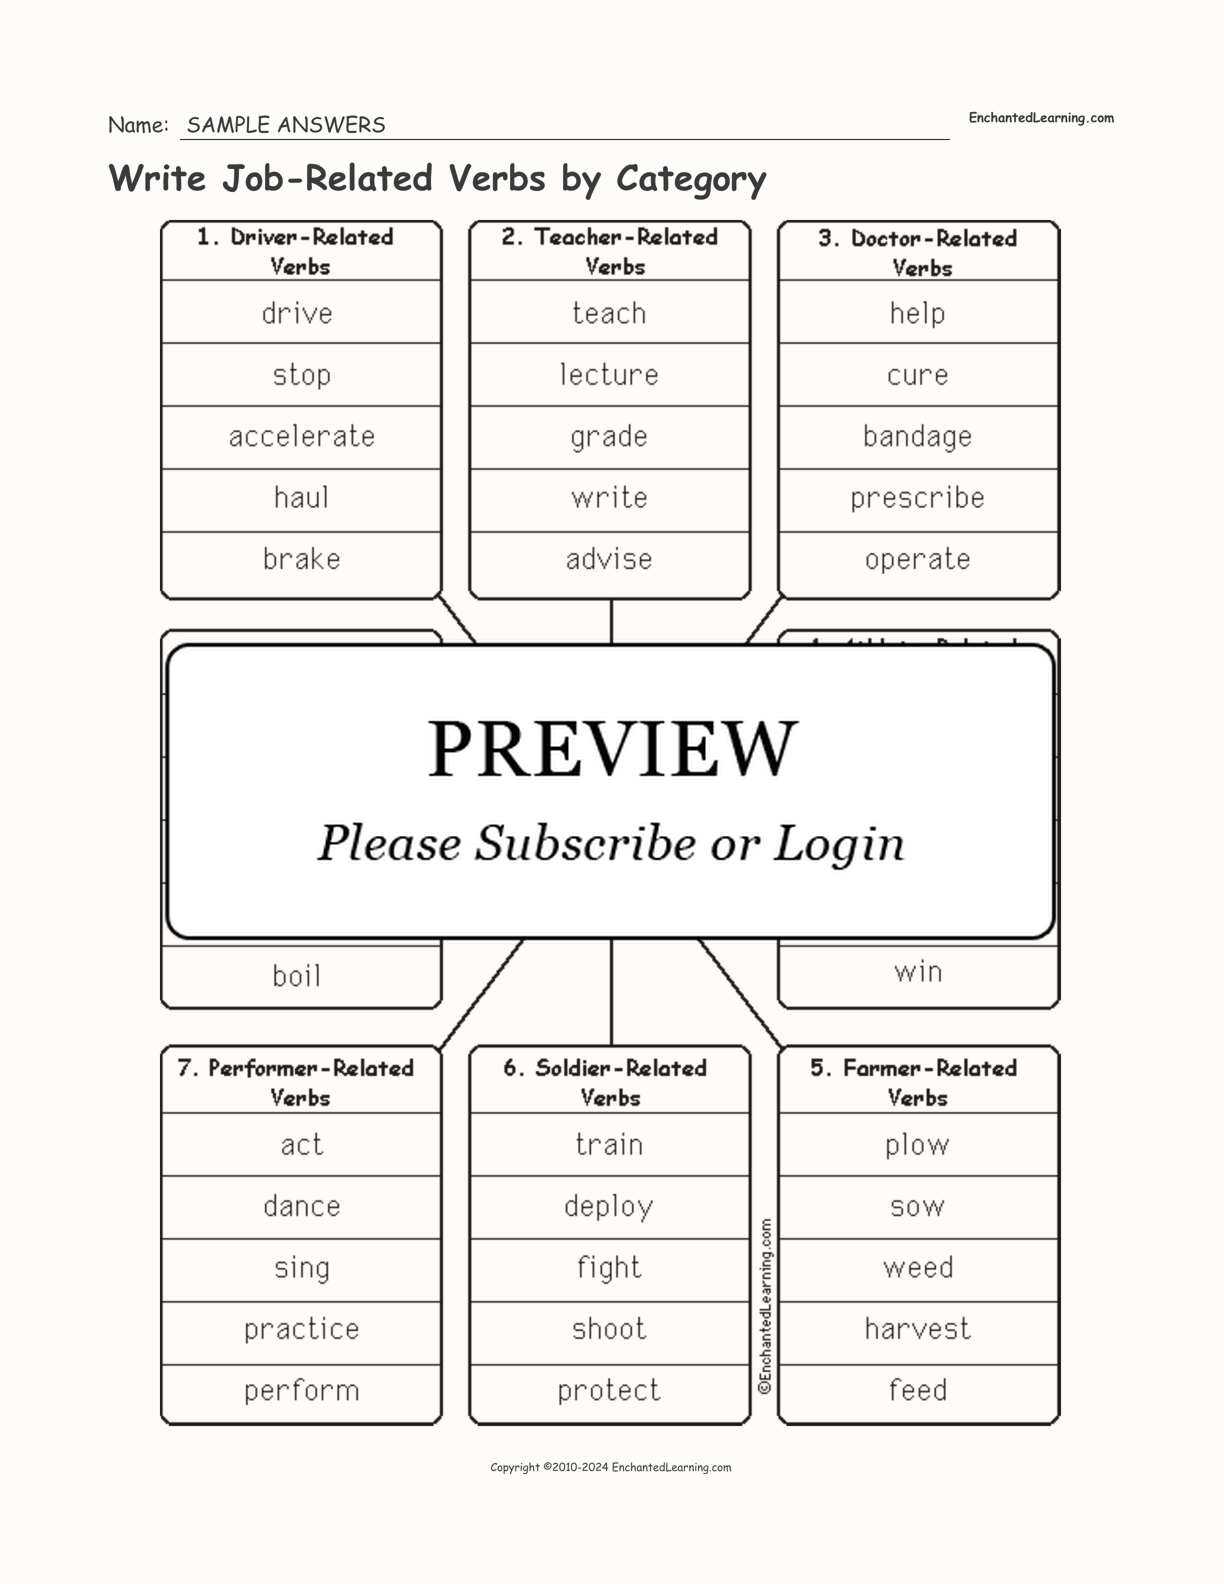 Write Job-Related Verbs by Category interactive worksheet page 2